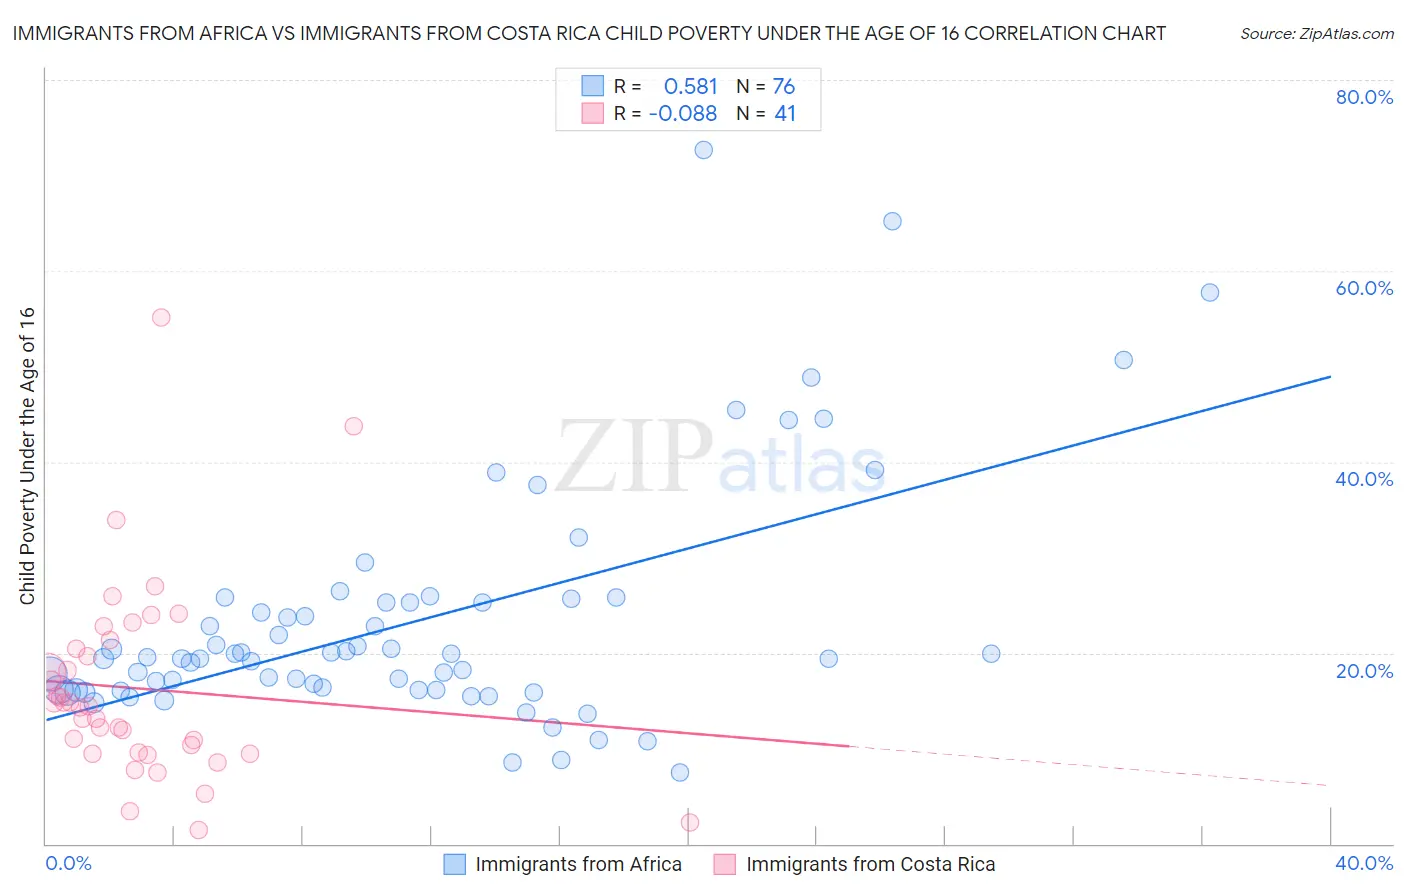 Immigrants from Africa vs Immigrants from Costa Rica Child Poverty Under the Age of 16